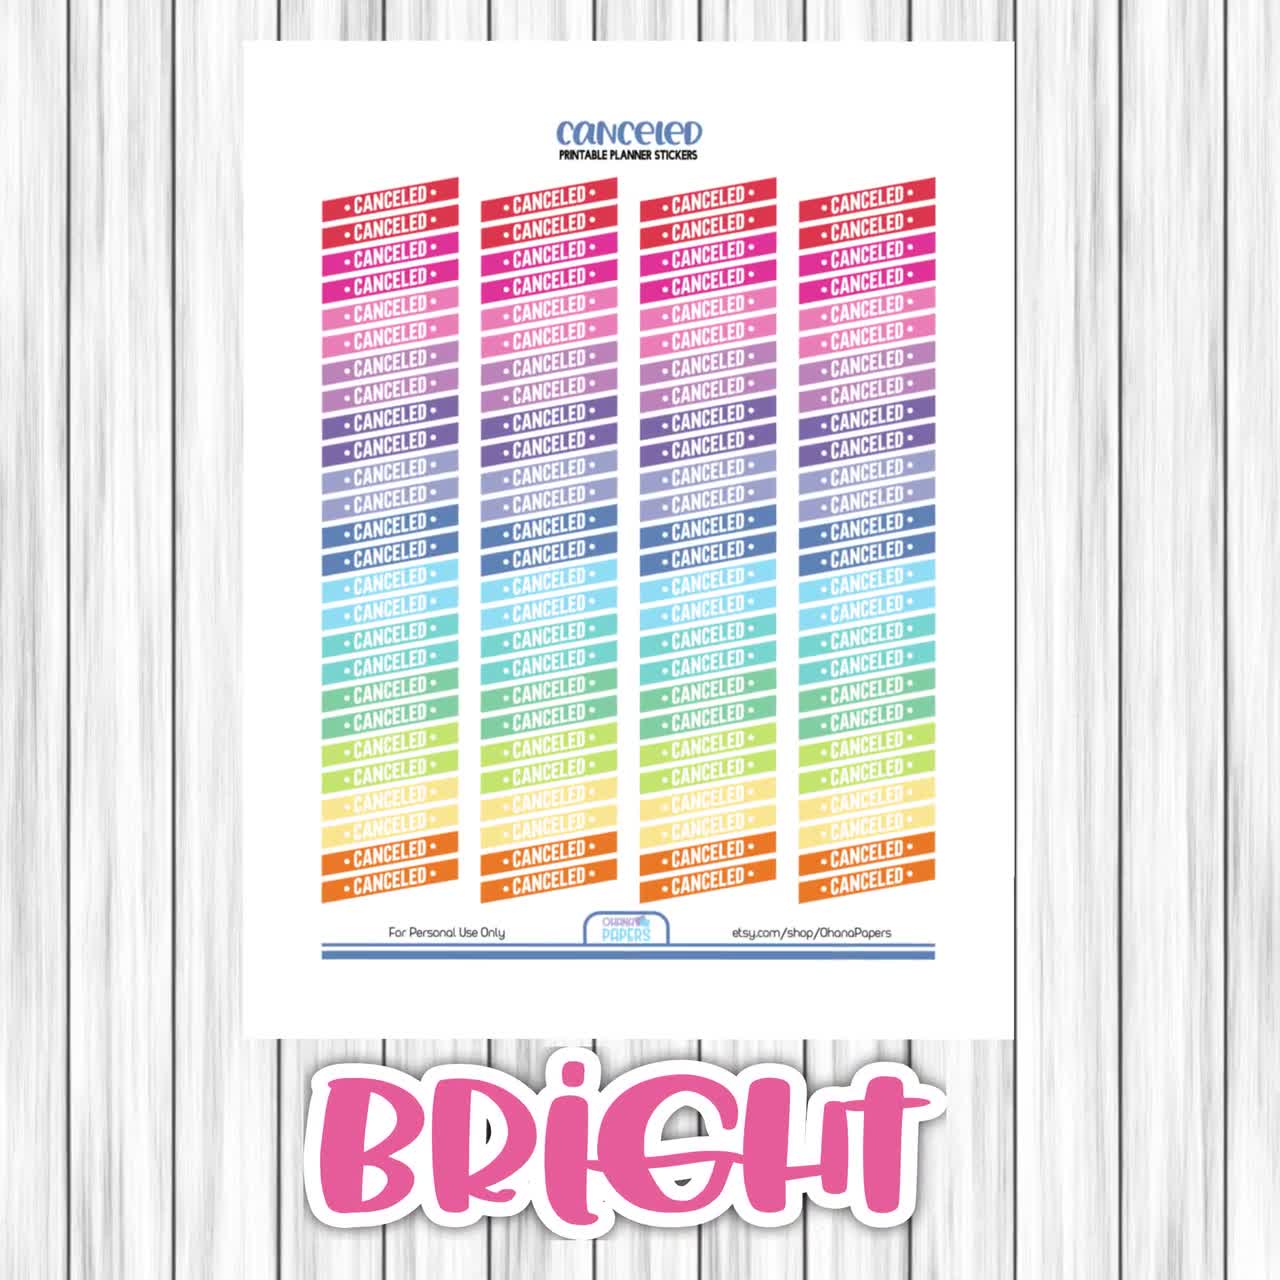 Colorful Planner Stickers - by TCR